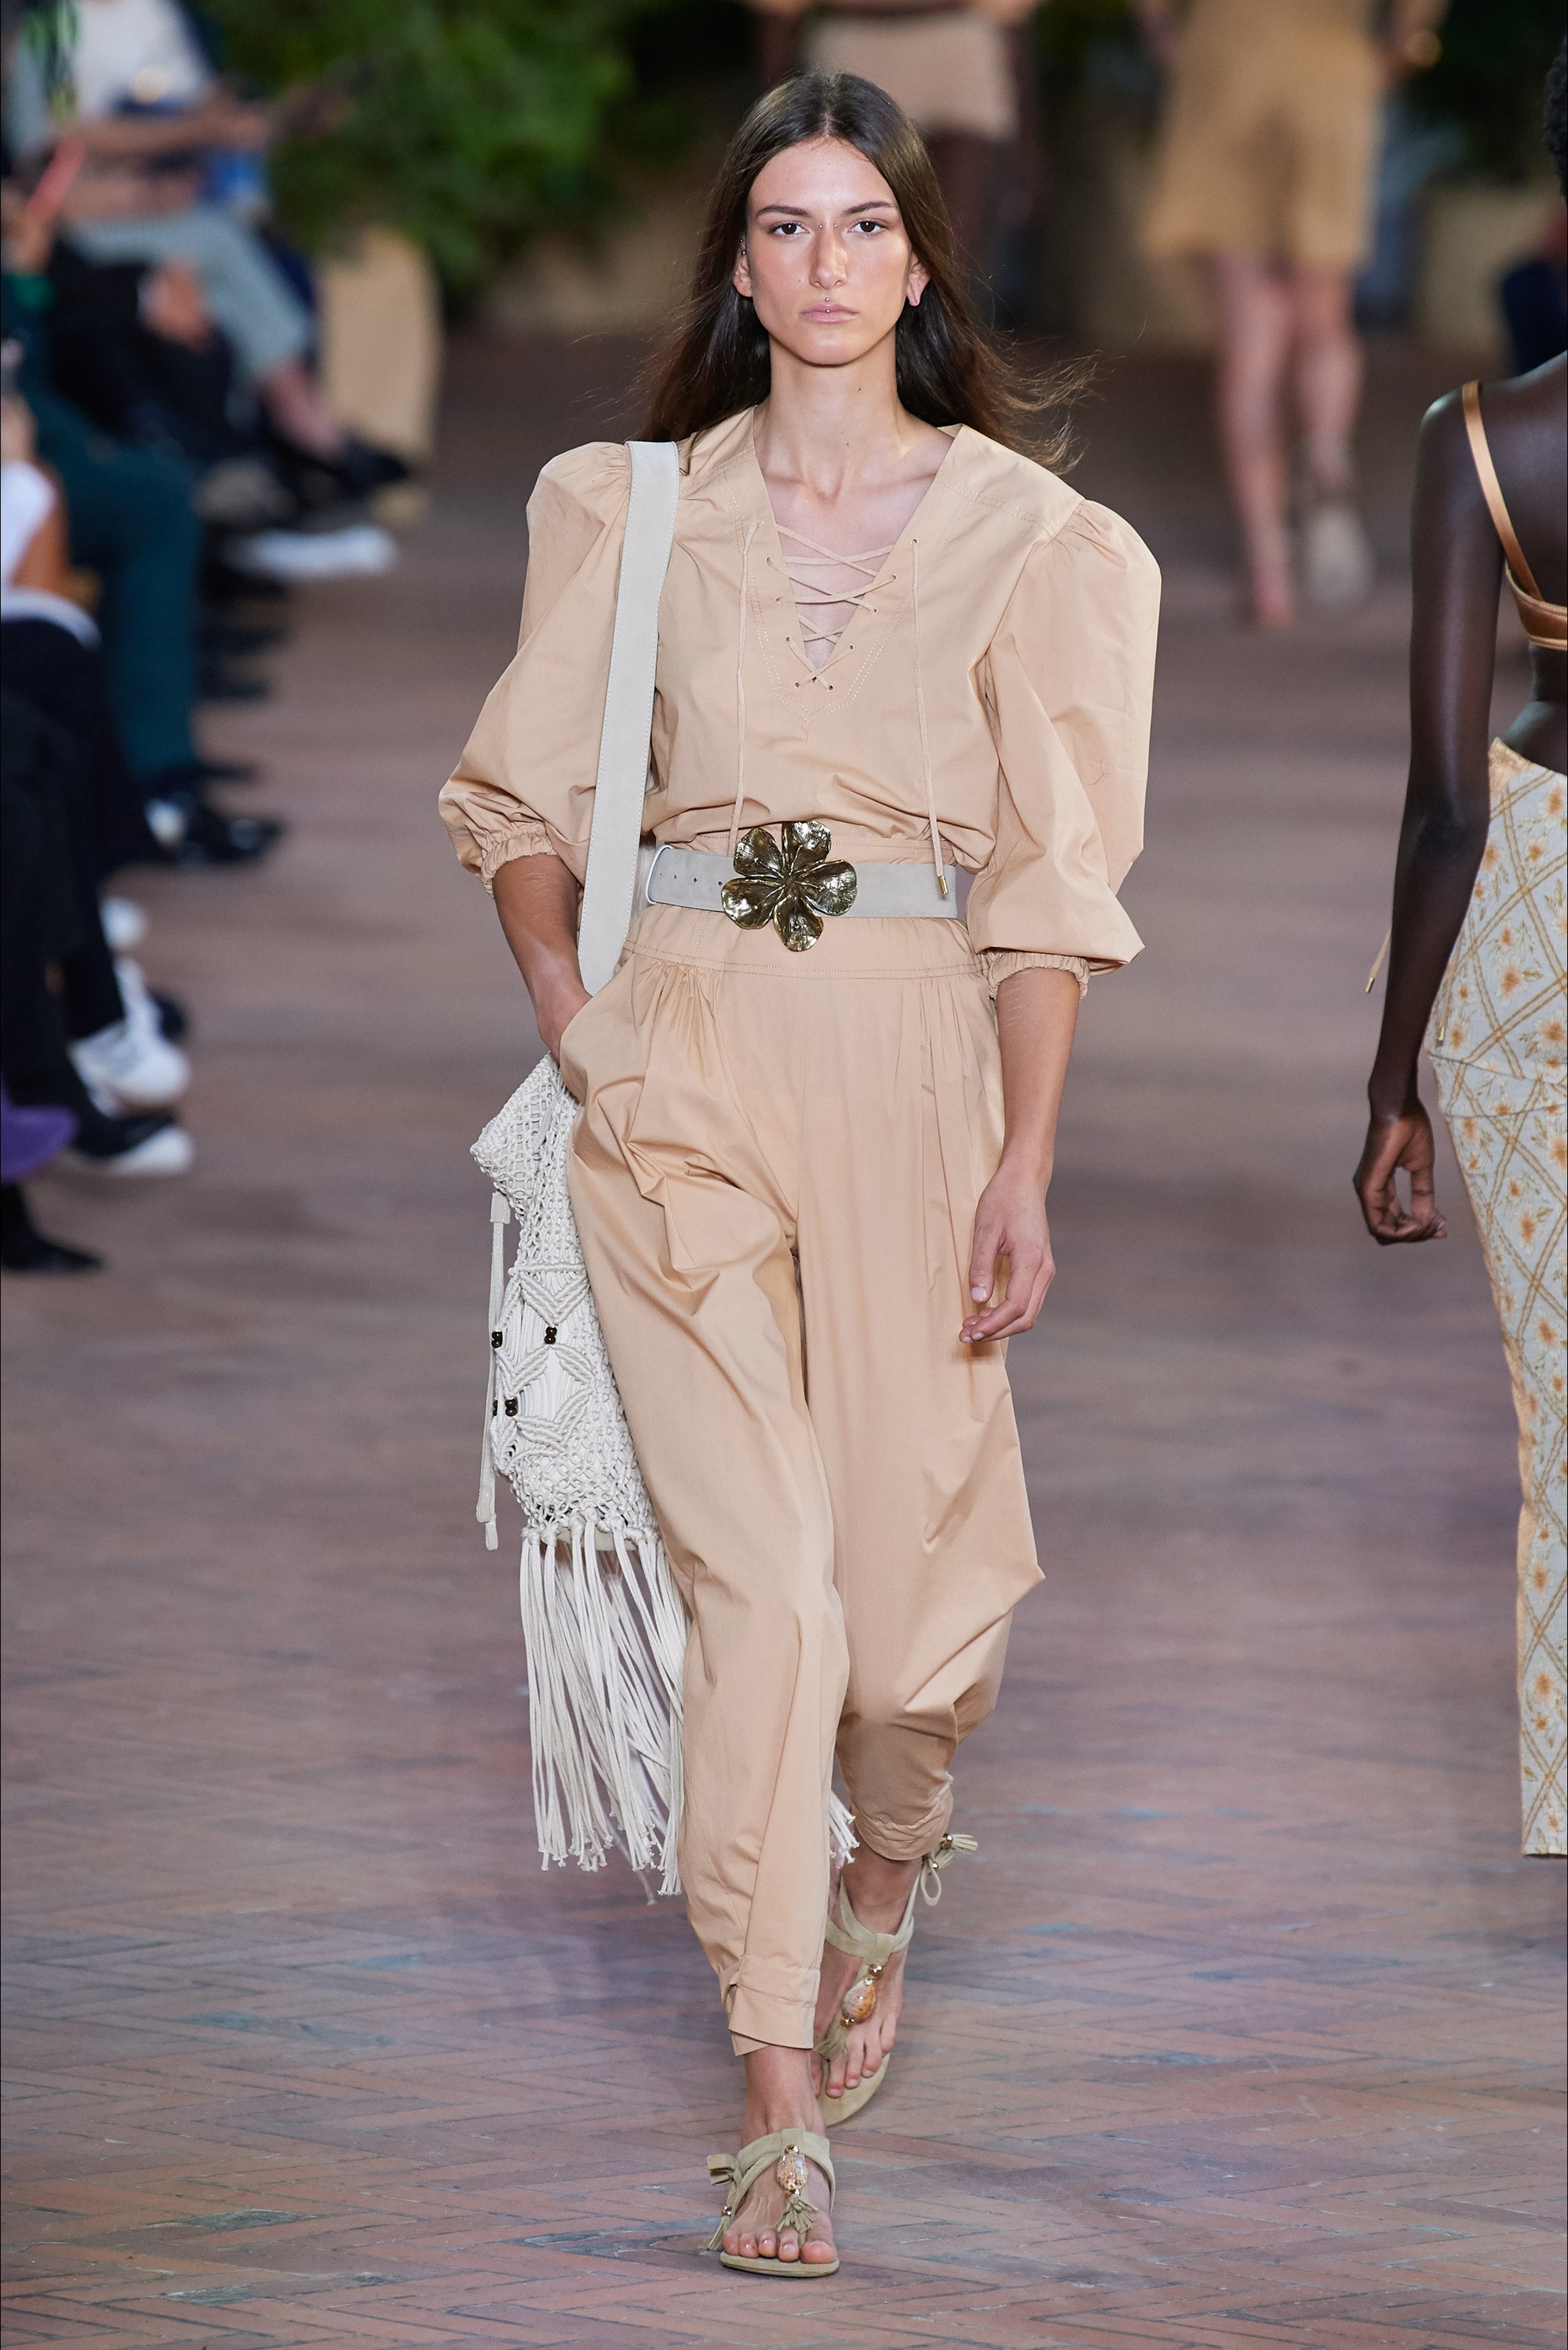 Alberta Ferretti Spring 2021 Ready-to-Wear Collection | Cool Chic Style ...